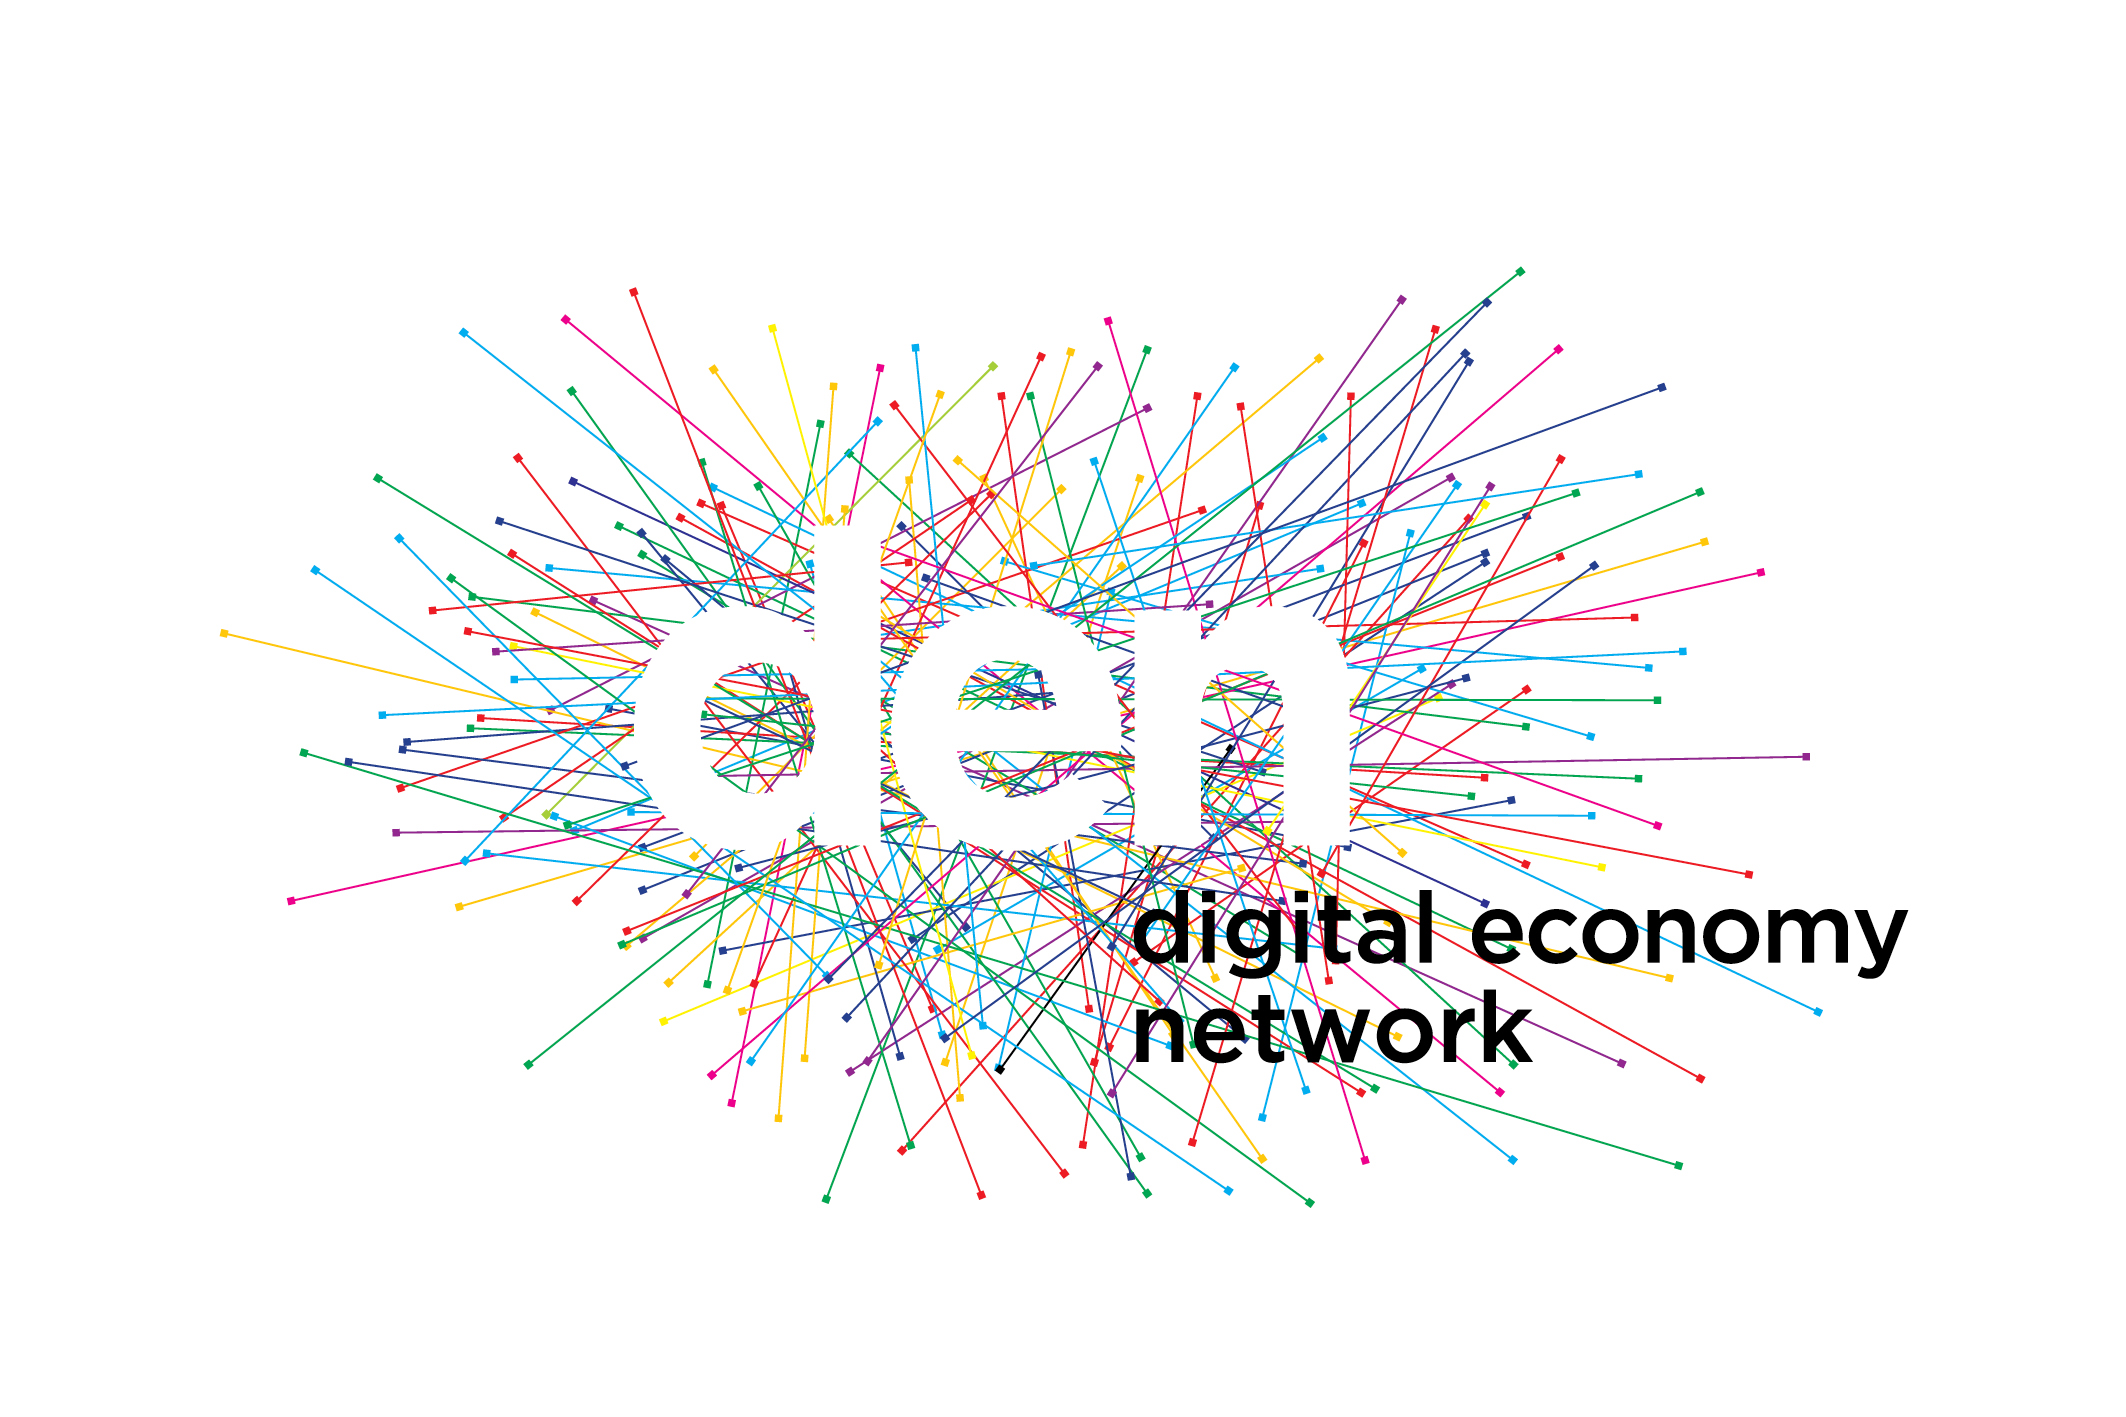 The Digital Economy Network logo. It consists of a network of colorful lines with the letters 'den' in white on top.